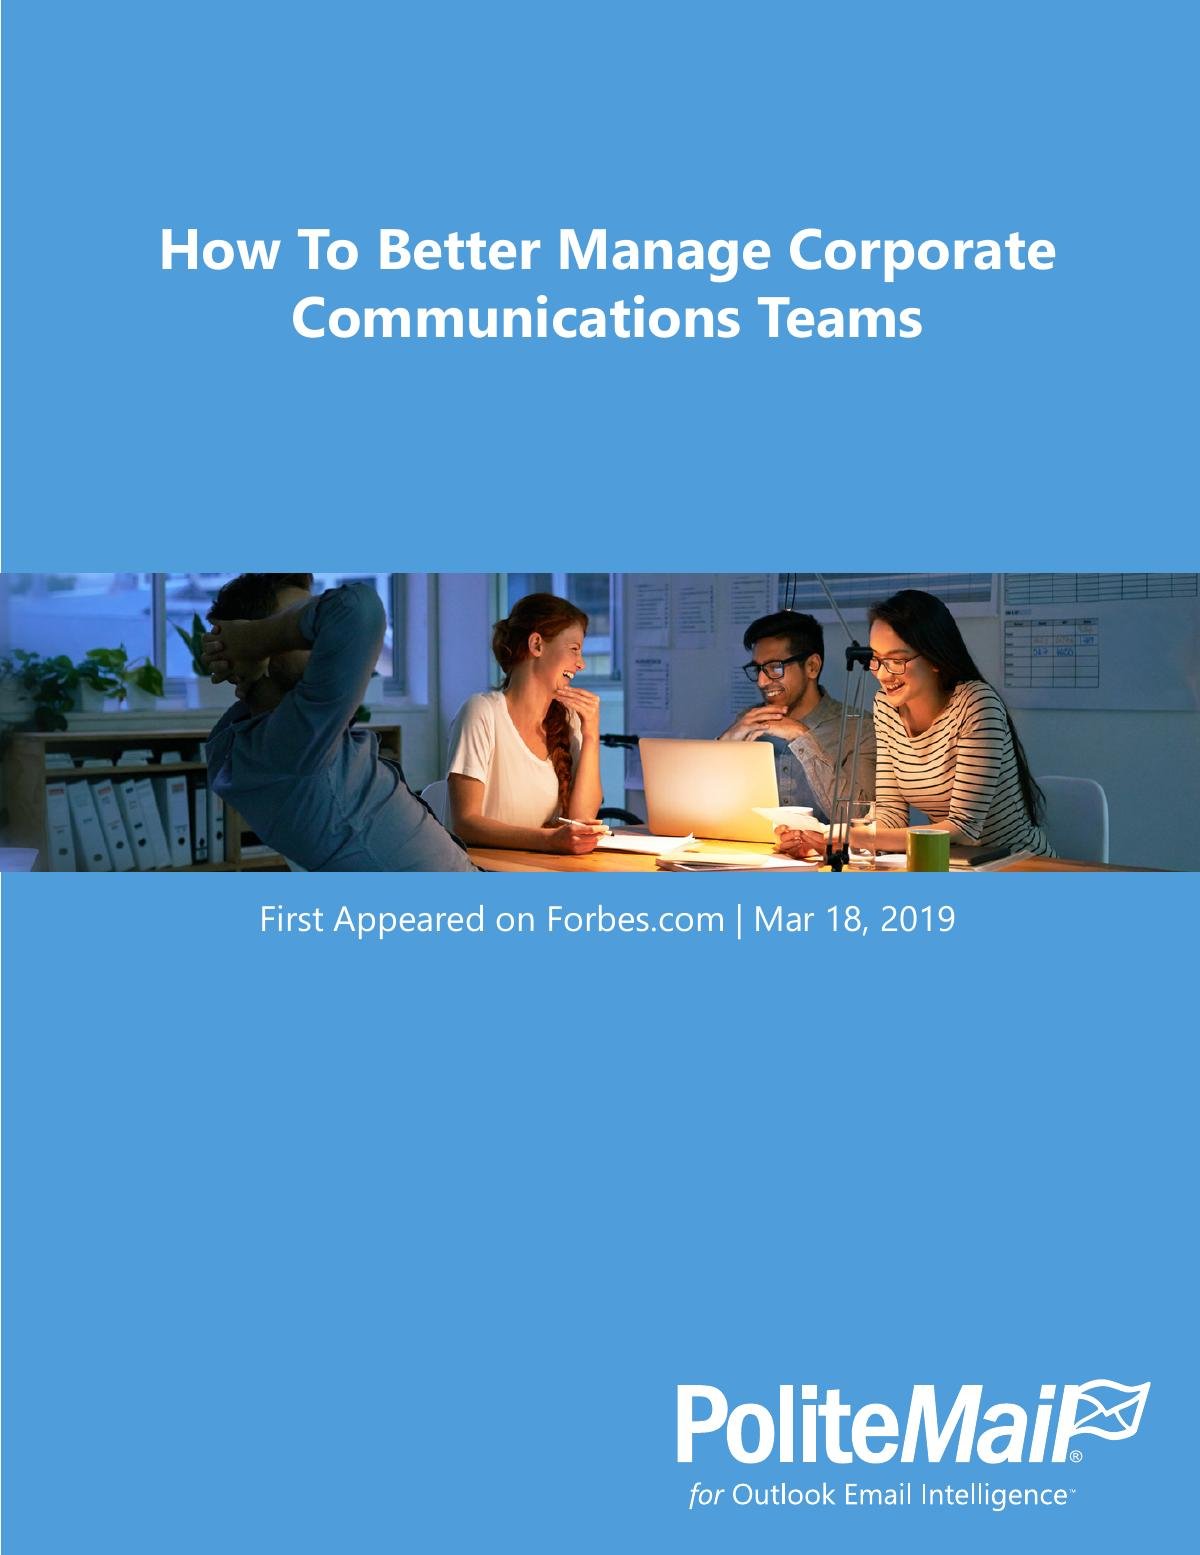 How To Better Manage Corporate Communications Teams